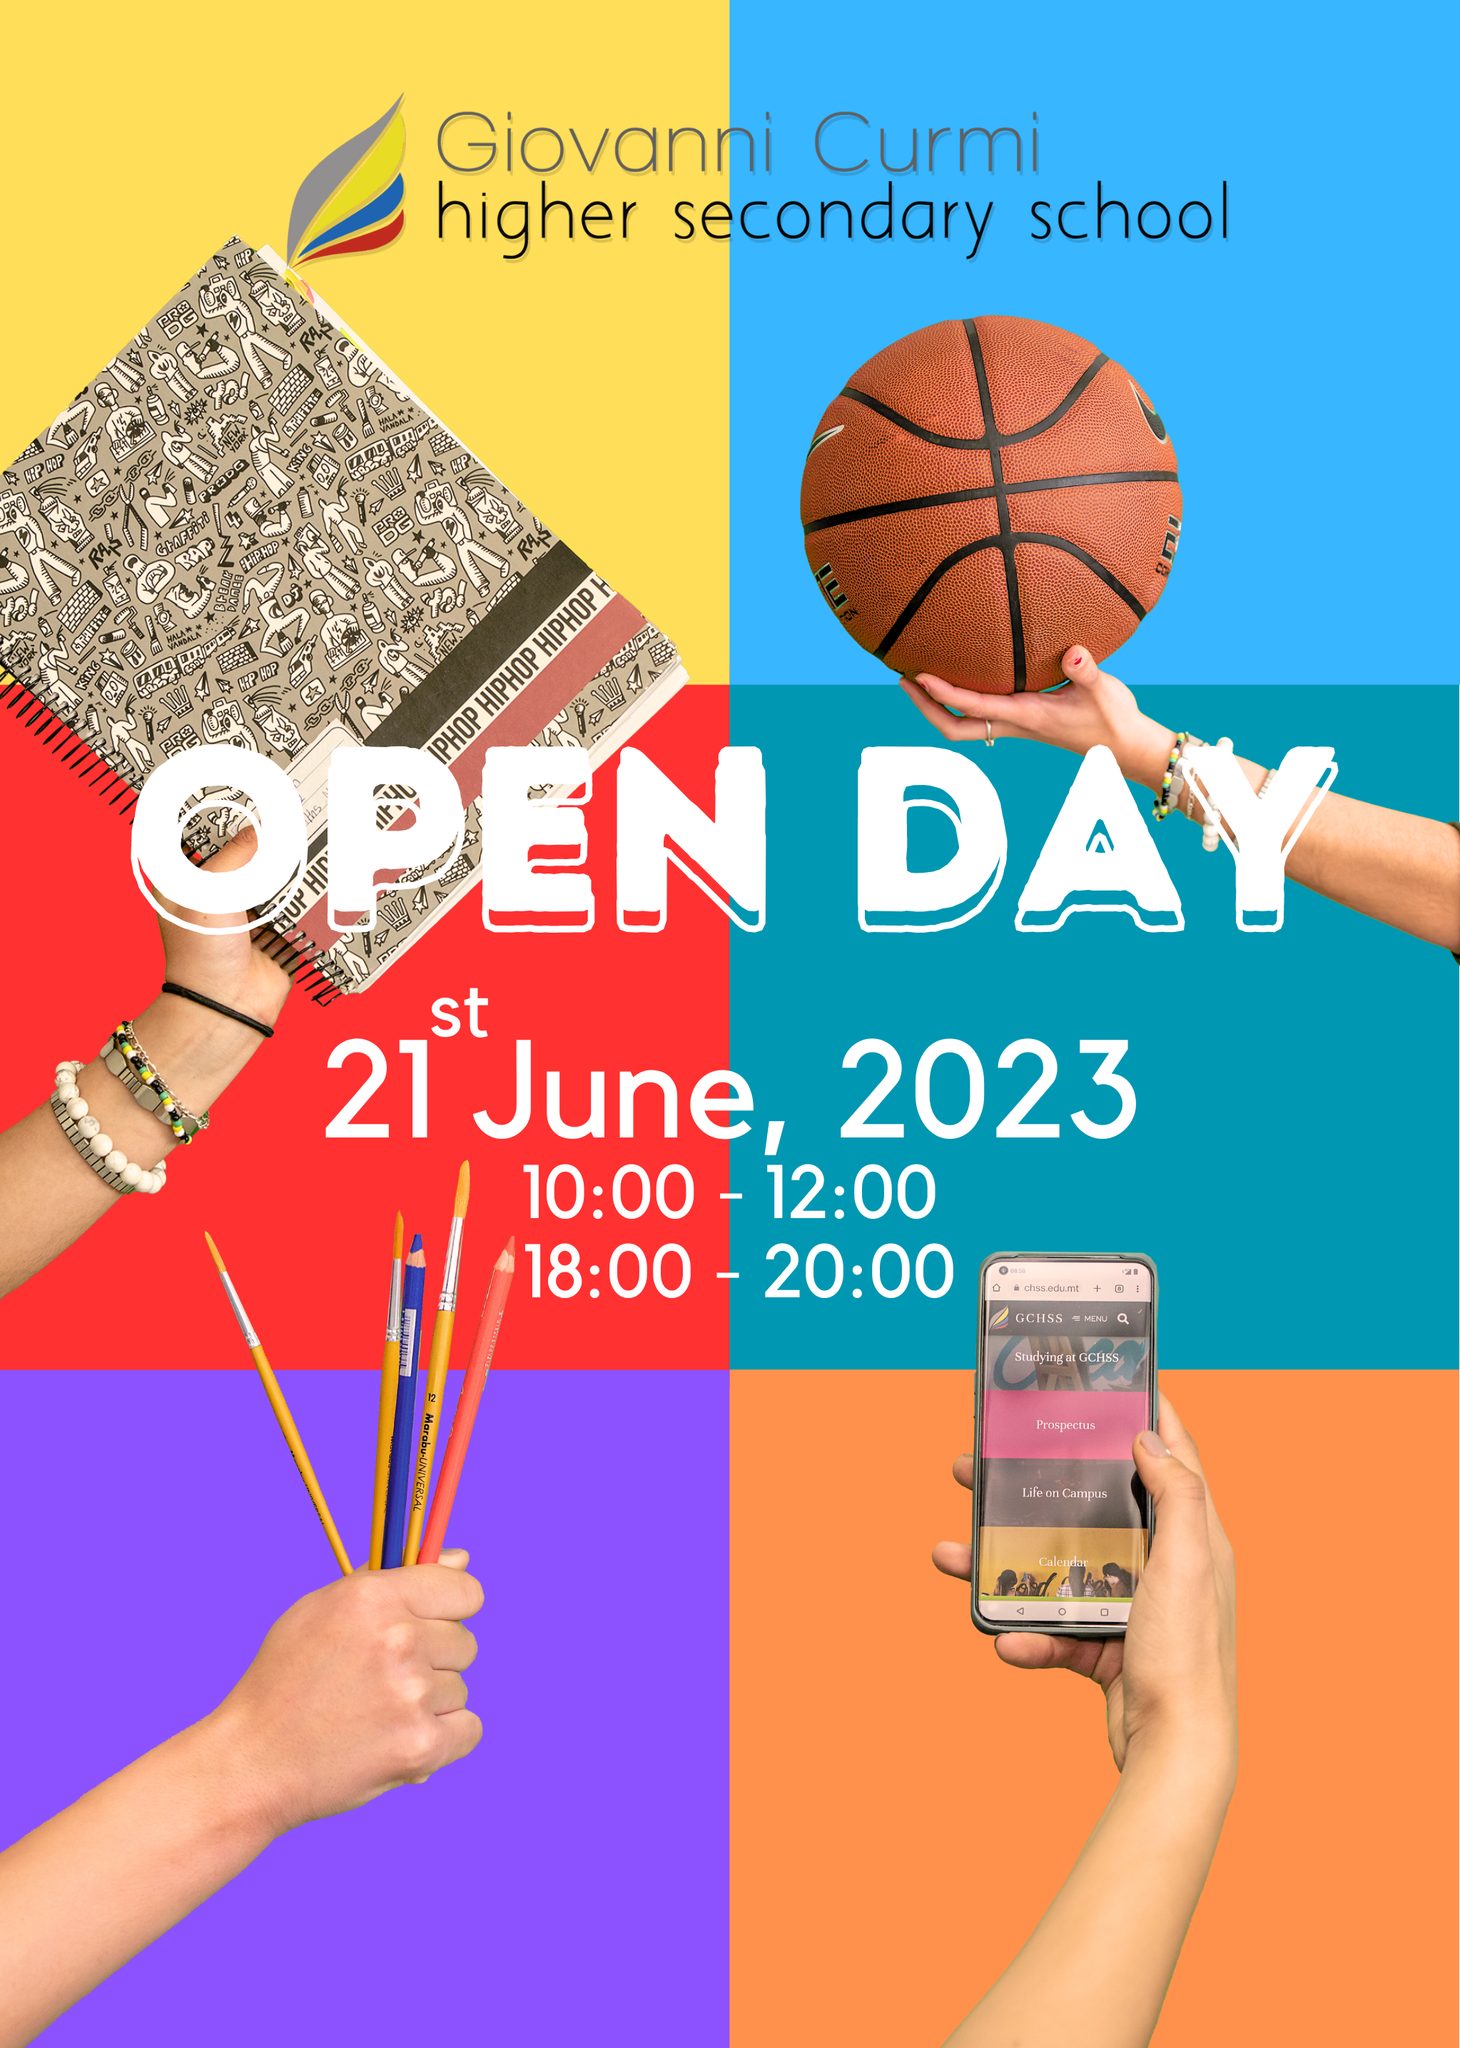 Open Day!